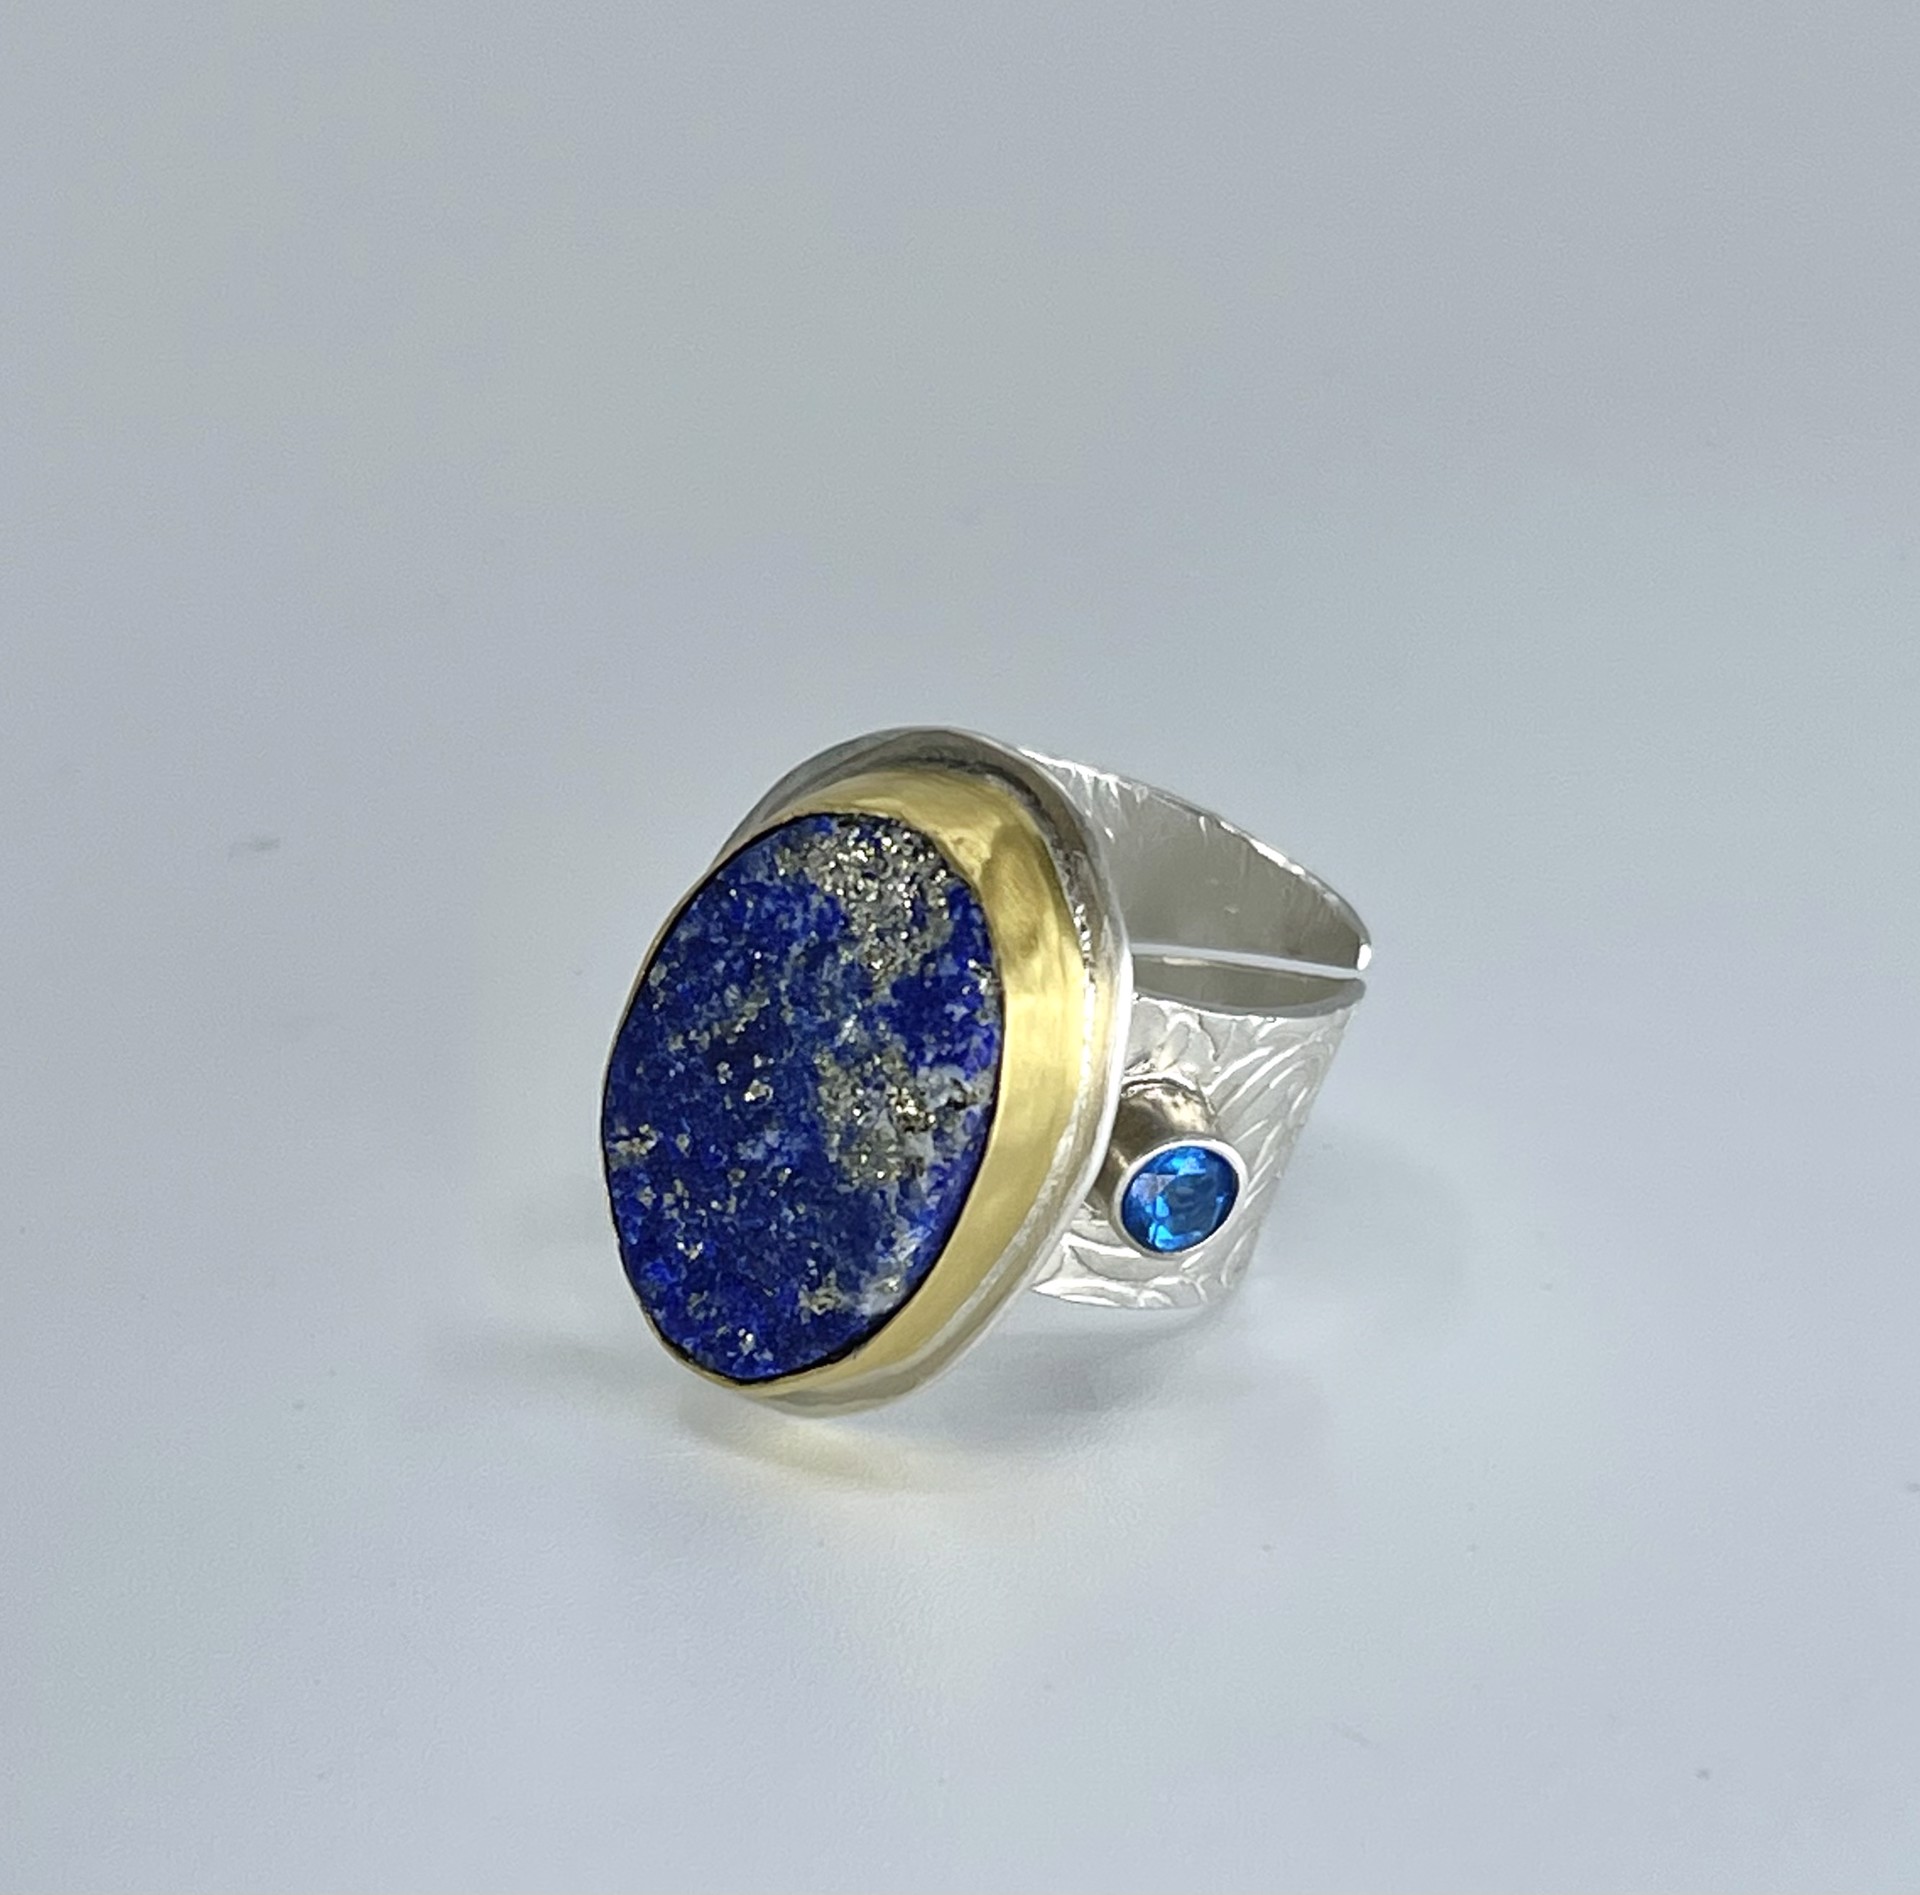 2222 Lapis & 2 Topaz Stones Ring by Suzanne Brown